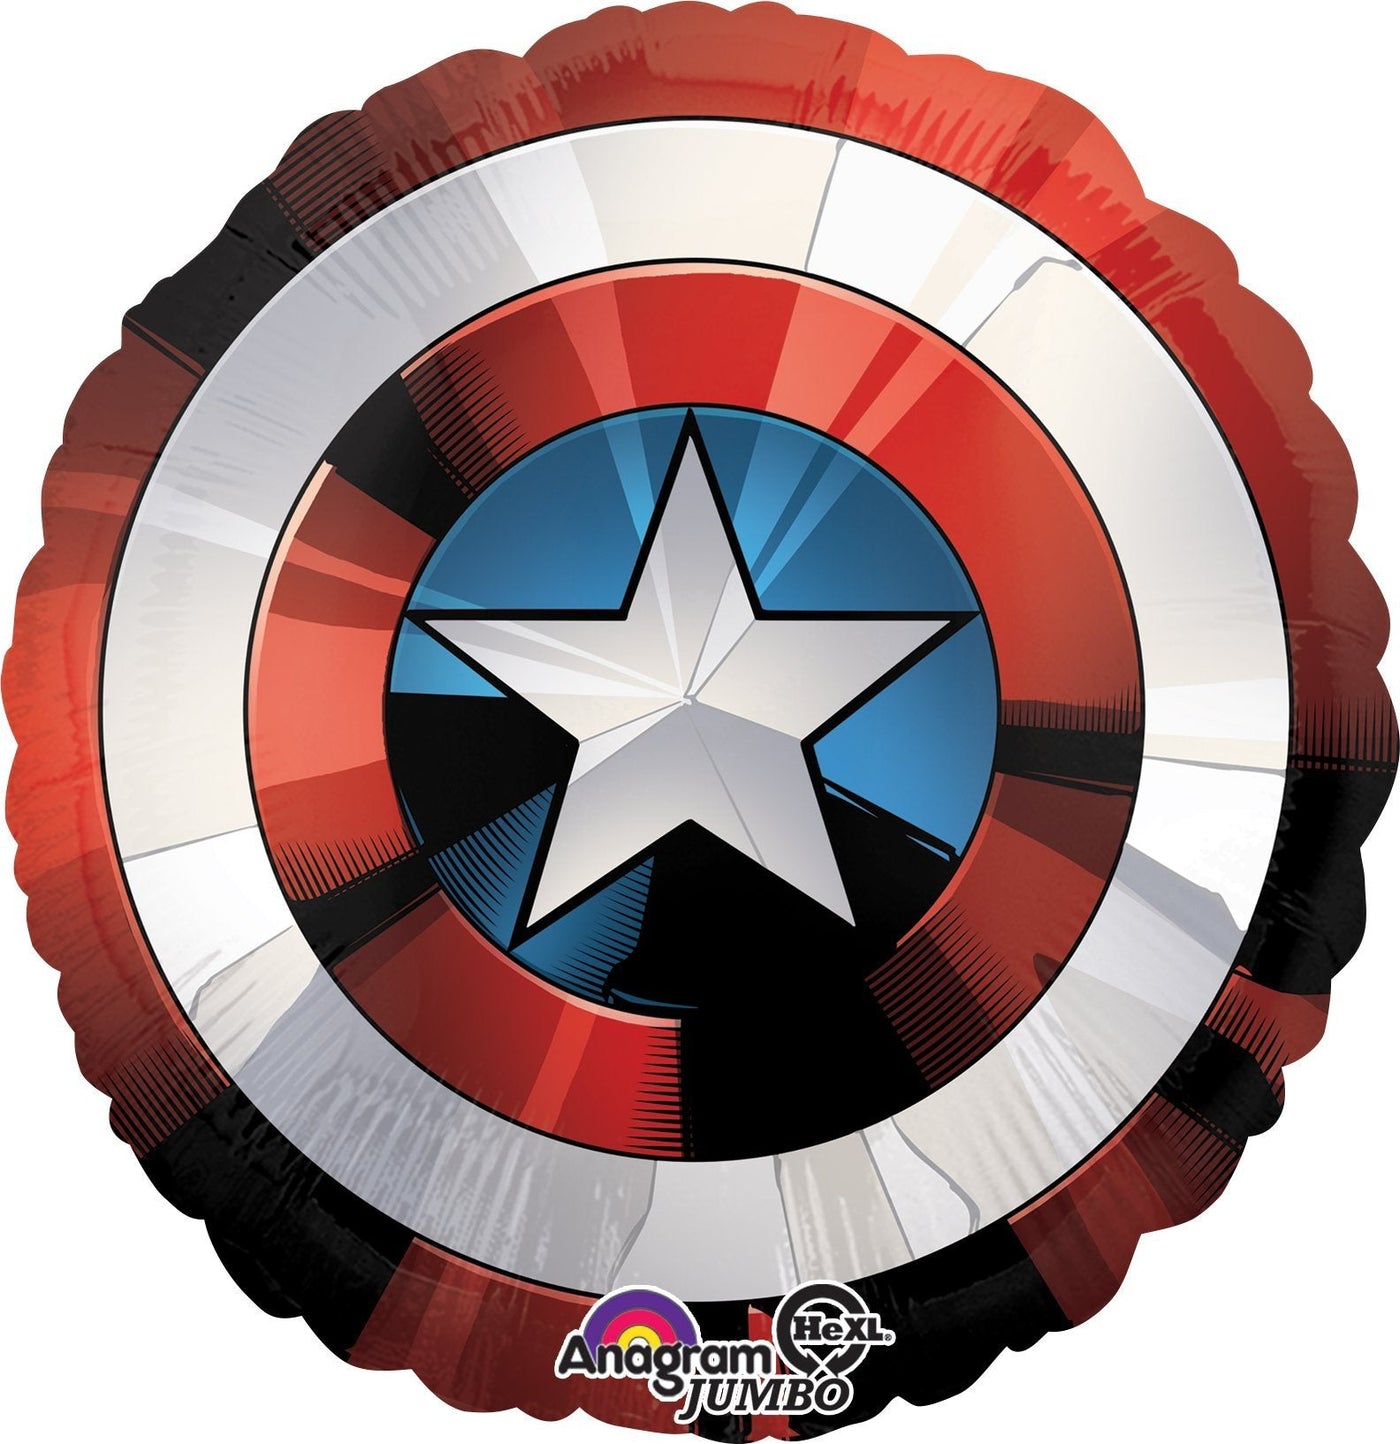 Cpt America Shield Balloon 28'' - JJ's Party House